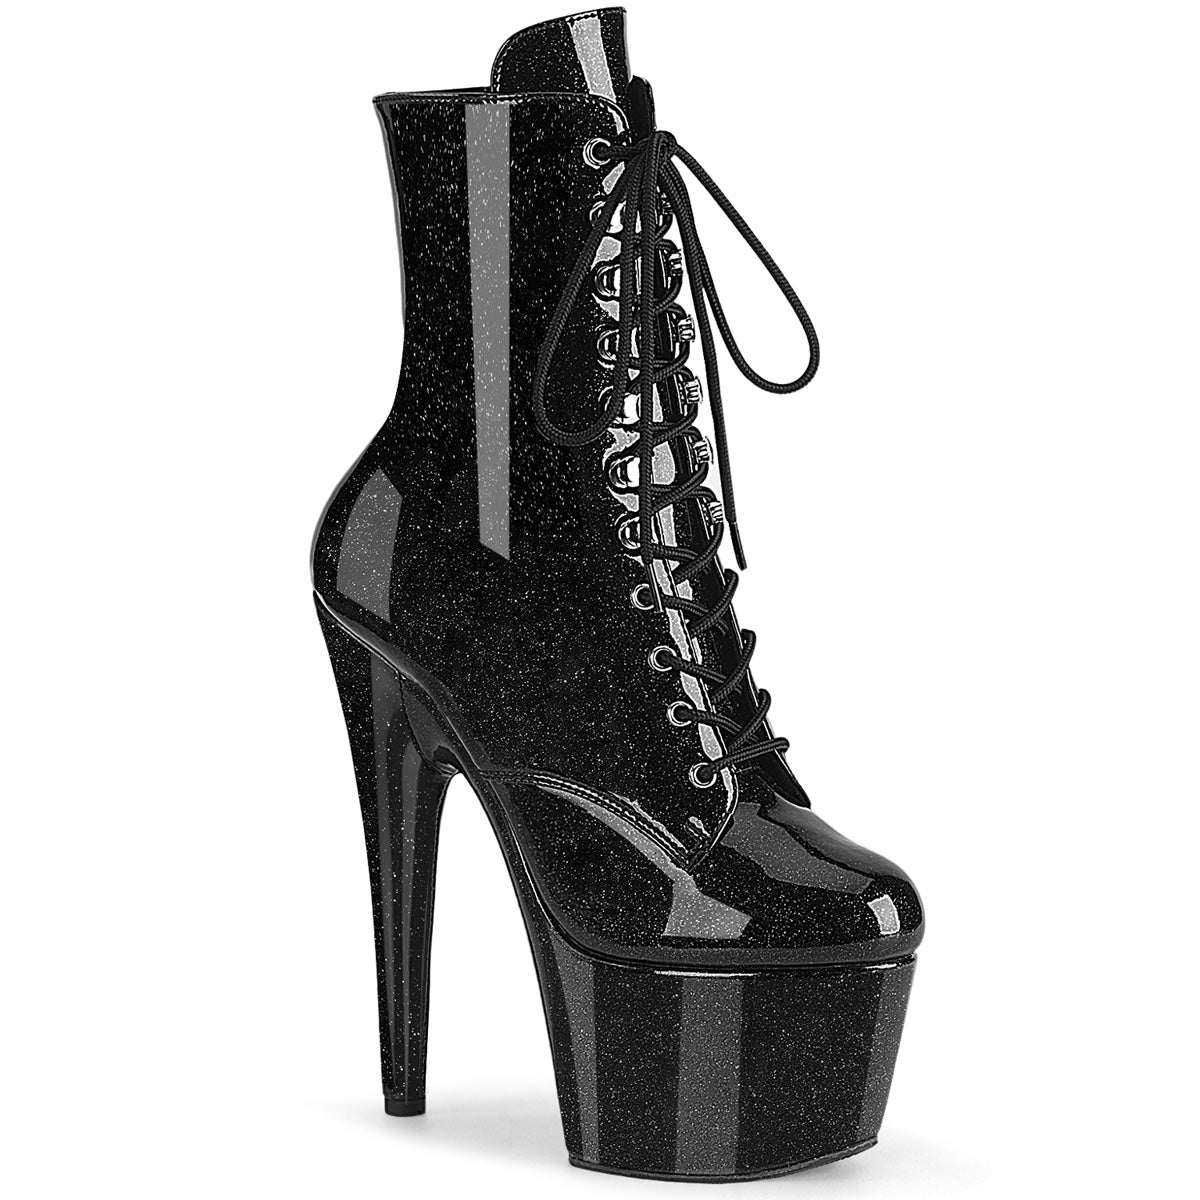 7 Inch Heel Glitter Boots with Lace-Up Front